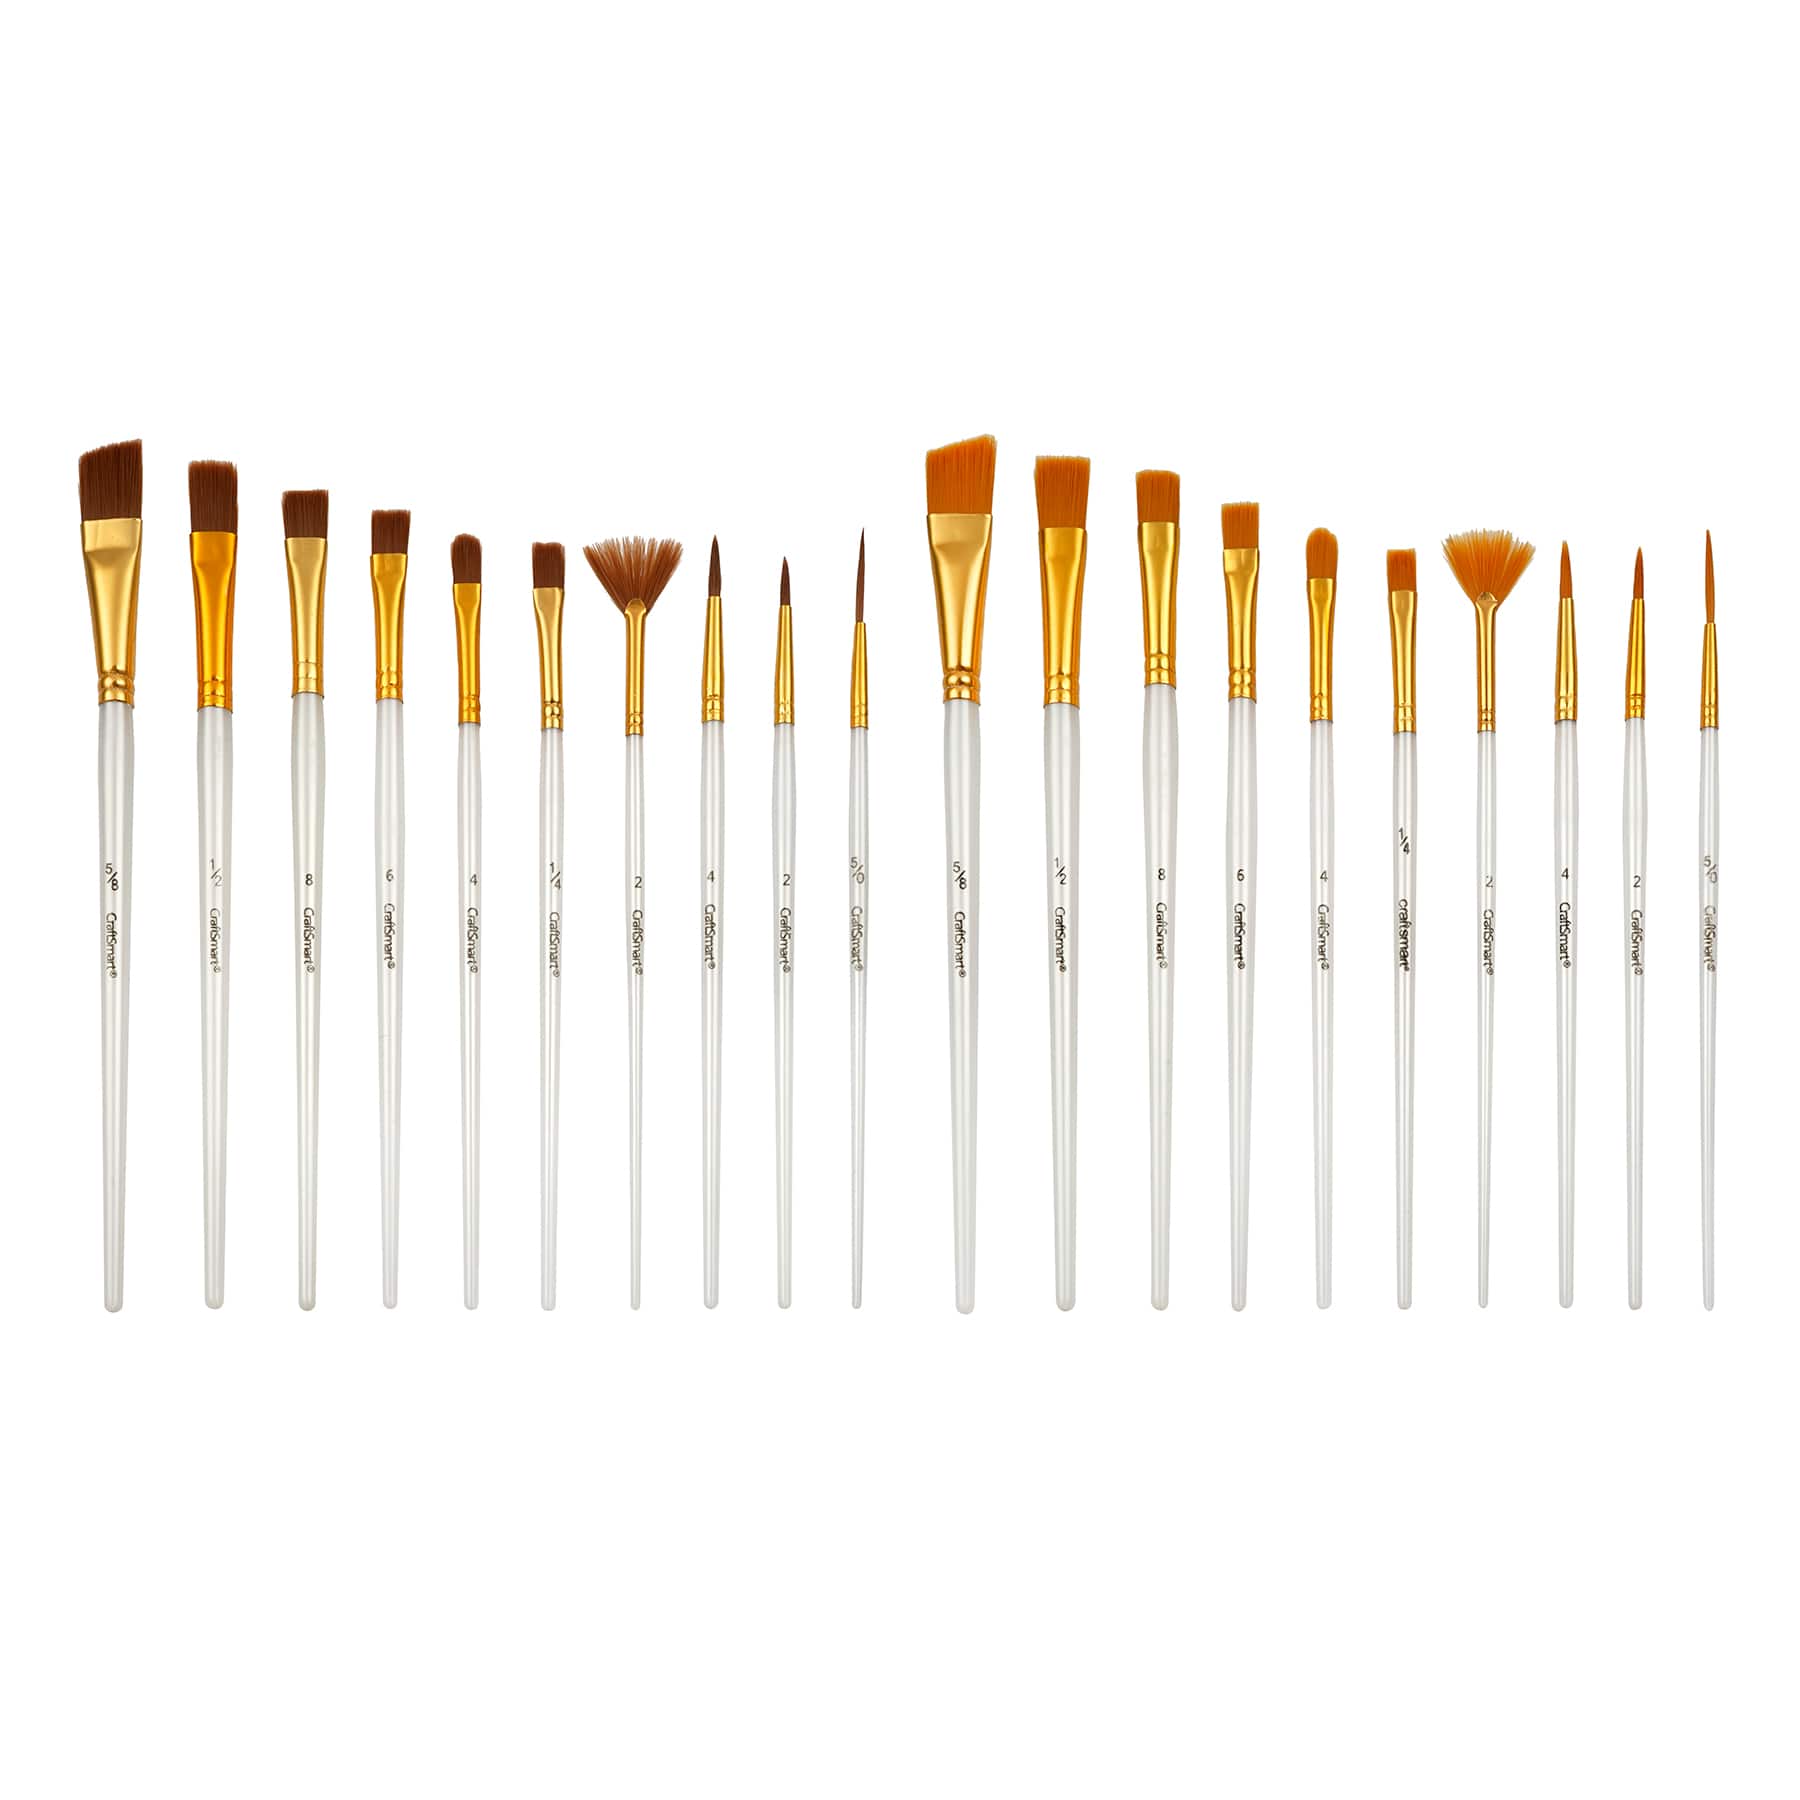 6 Piece Silicone Brush Set by Craft Smart®, Michaels